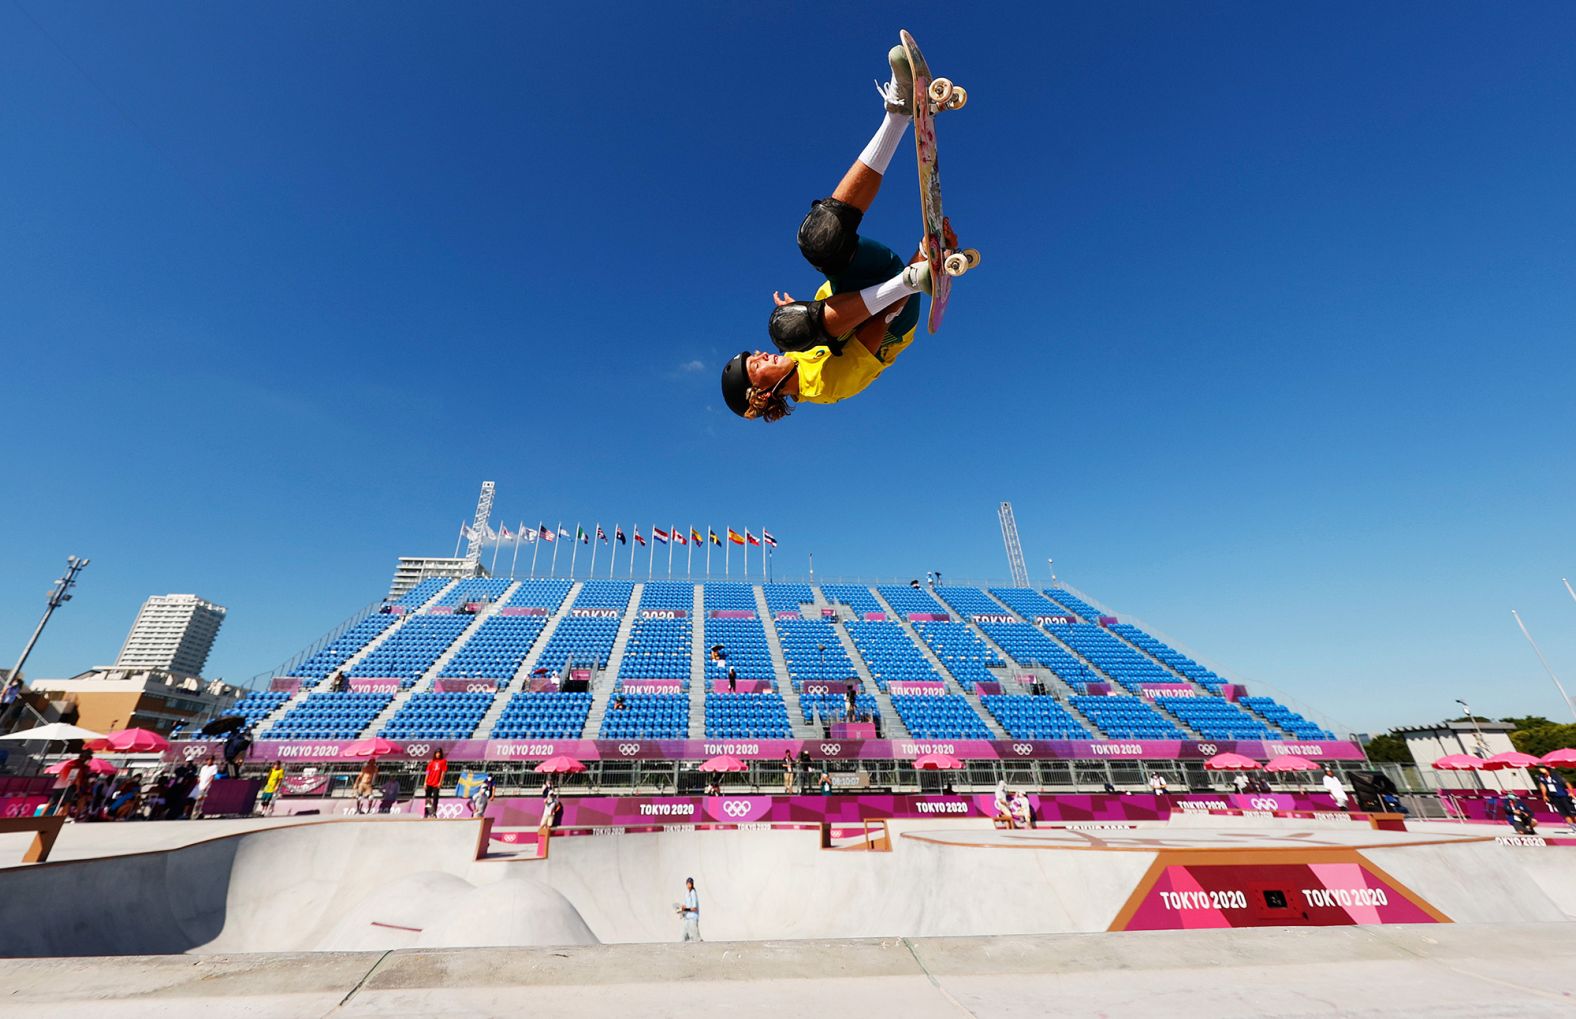 Australia's Keegan Palmer warms up prior to the park skateboarding competition on August 5. <a href="https://www.cnn.com/world/live-news/tokyo-2020-olympics-08-05-21-spt/h_3b0447ab85bc74a7de159247fed341ad" target="_blank">Palmer went on to win gold in the event.</a>